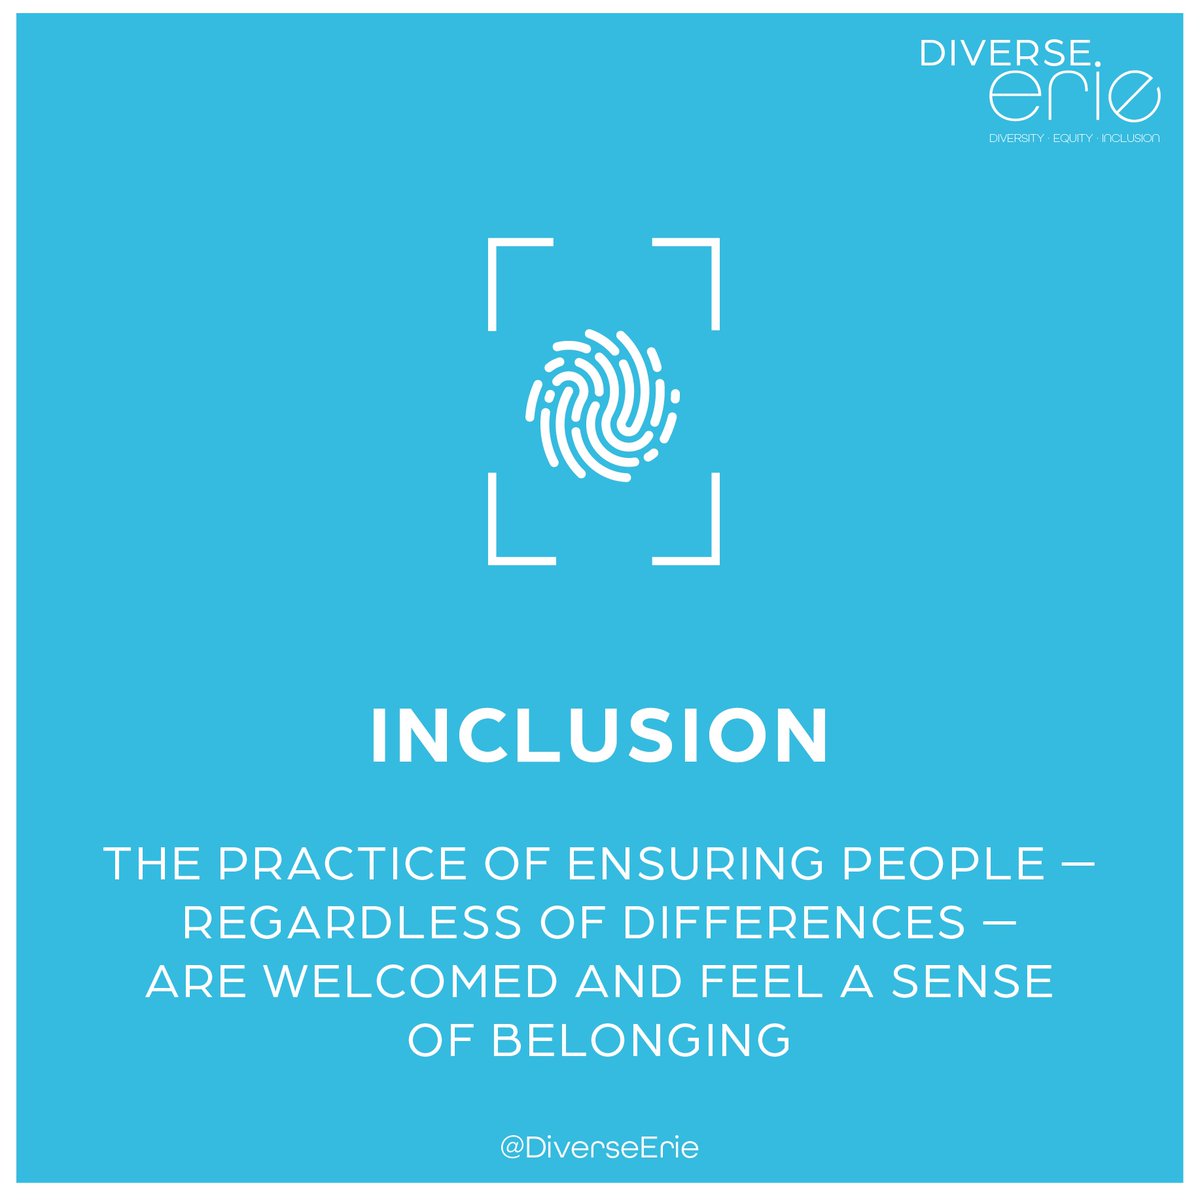 #Inclusion is a feeling — can everyone come to work as their whole selves and feel part of the team? Why not? How can we change that? #DiverseErie is working towards creating an environment where all people of color are welcome and included.

diverseerie.org